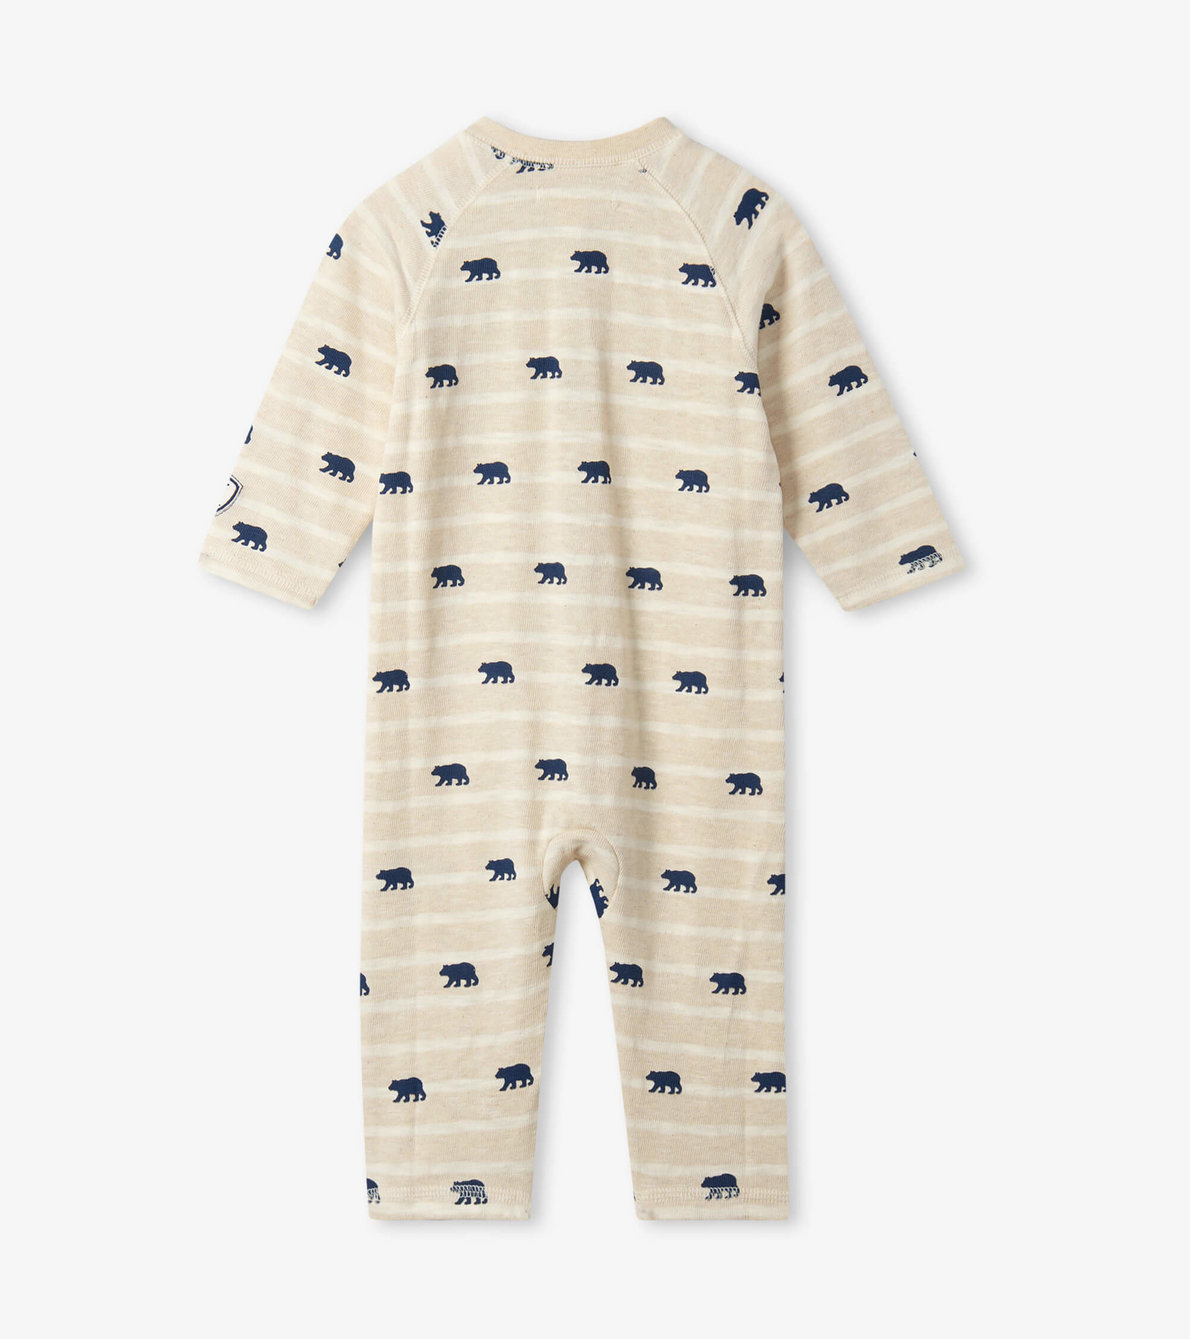 View larger image of Mini Bears Baby Romper